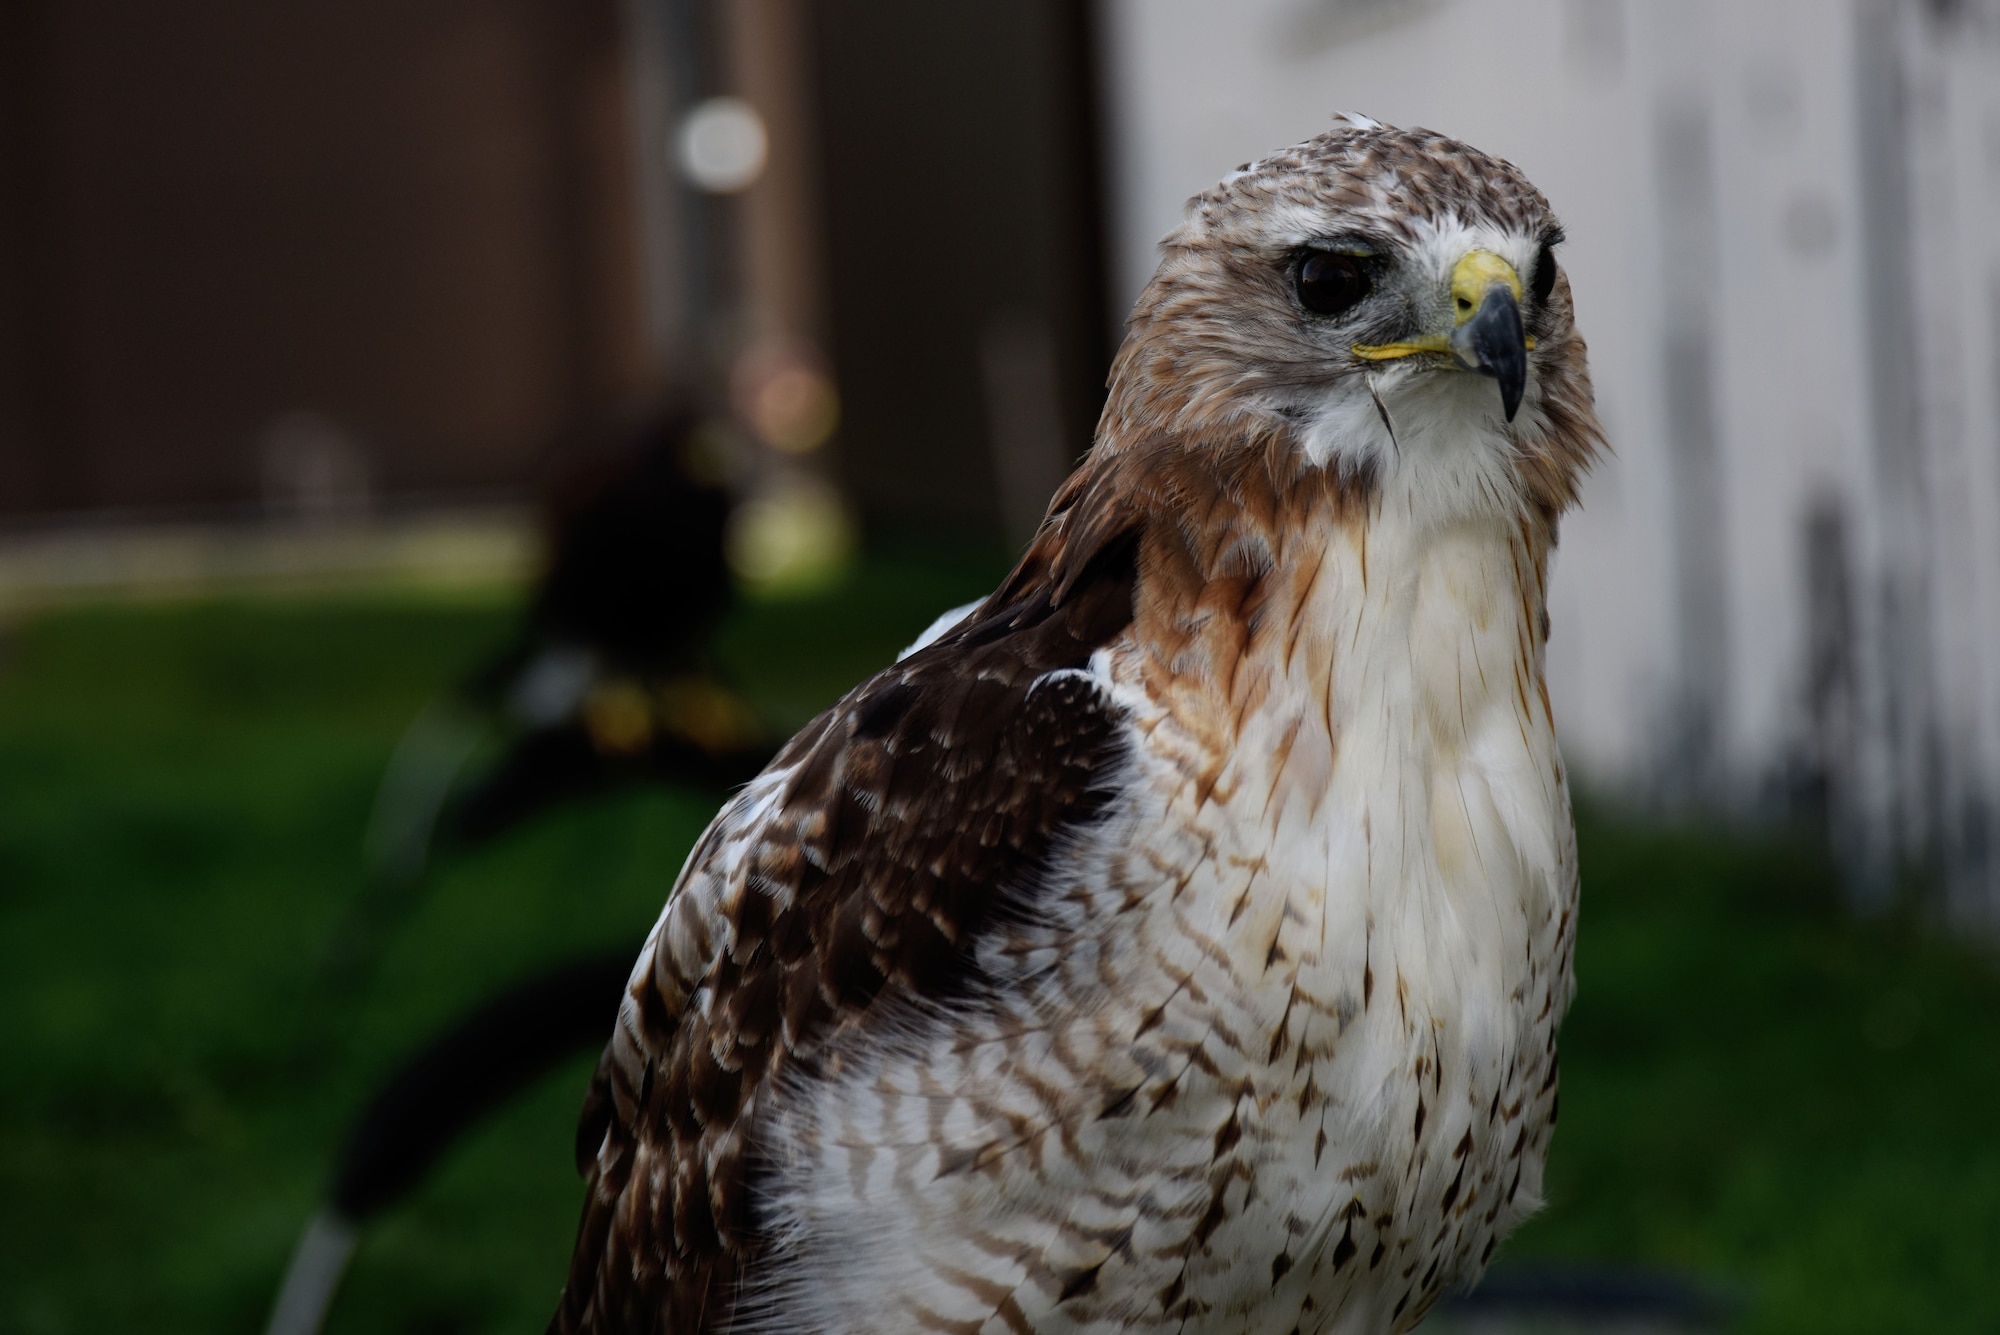 Roose, a red-tailed hawk, sits on a perch at Royal Air Force Lakenheath, England, Oct. 12. Loomacres Wildlife uses birds of prey and other audial and visual deterrents to protect aircraft from bird strikes. (U.S. Air Force photo/Senior Airman Abby L. Finkel)